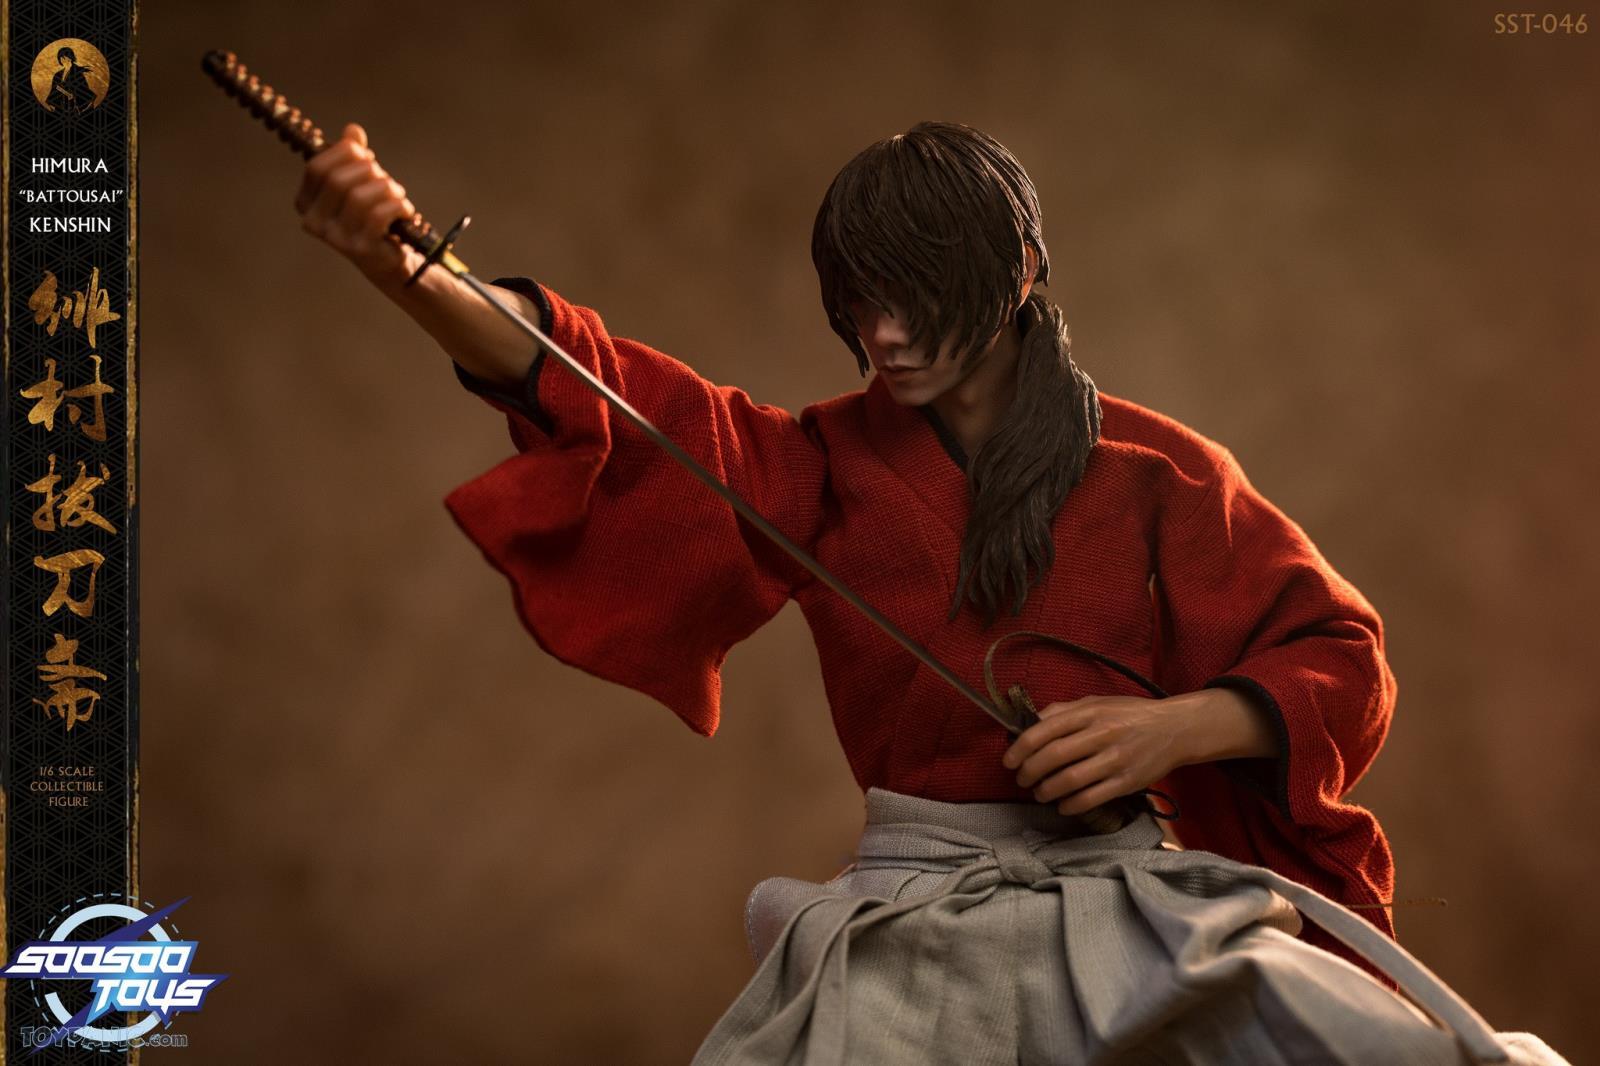 himura - NEW PRODUCT: 1/6 scale Rurouni Kenshin Collectible Figure from SooSooToys 712202251229PM_4050307